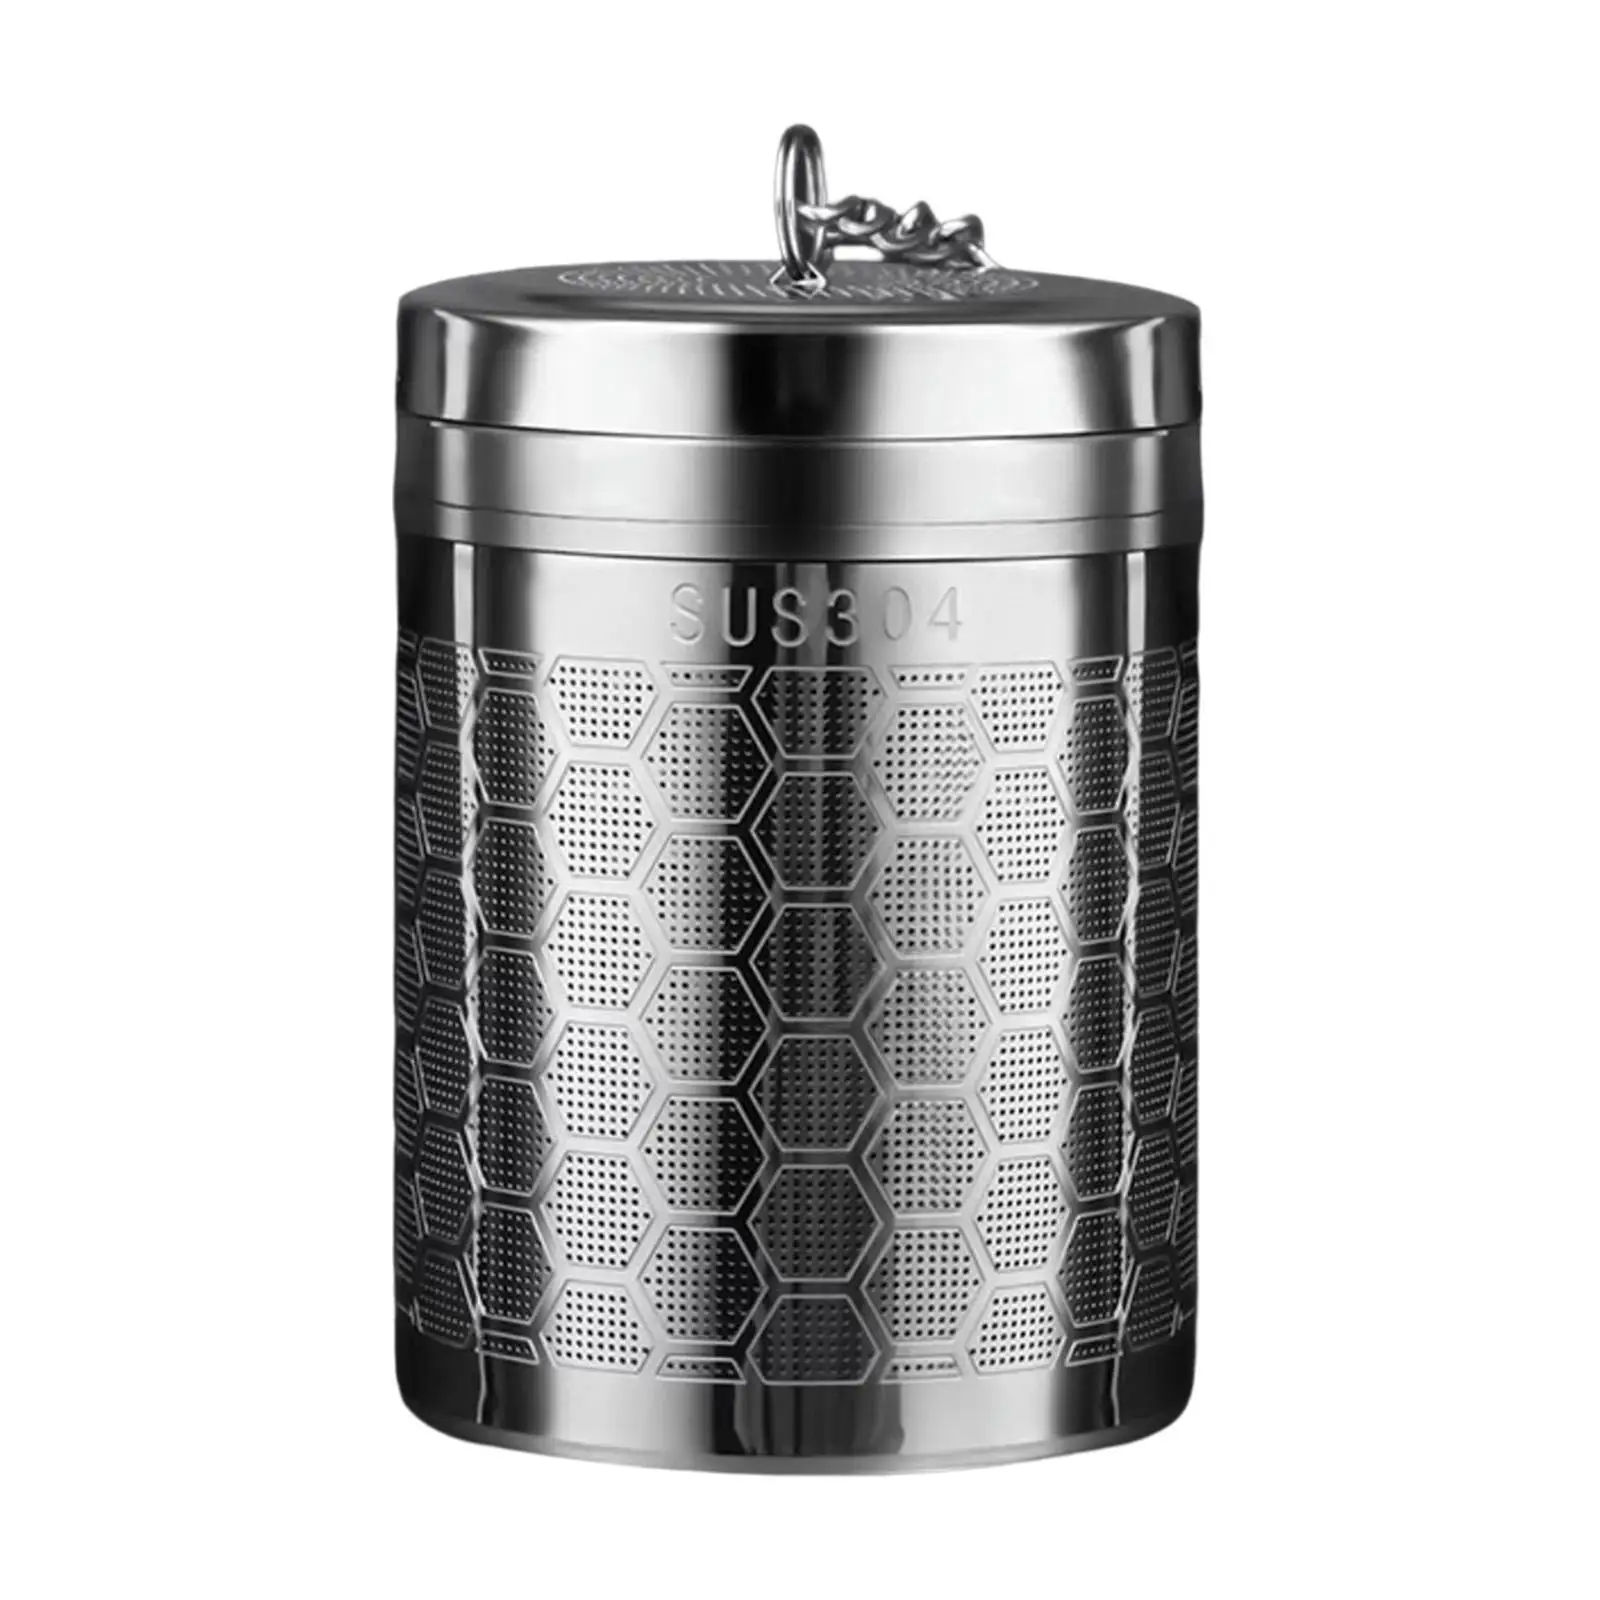 Cooking Infuser Spice Filter, Stainless Steel Multipurpose Fine Mesh Reusable